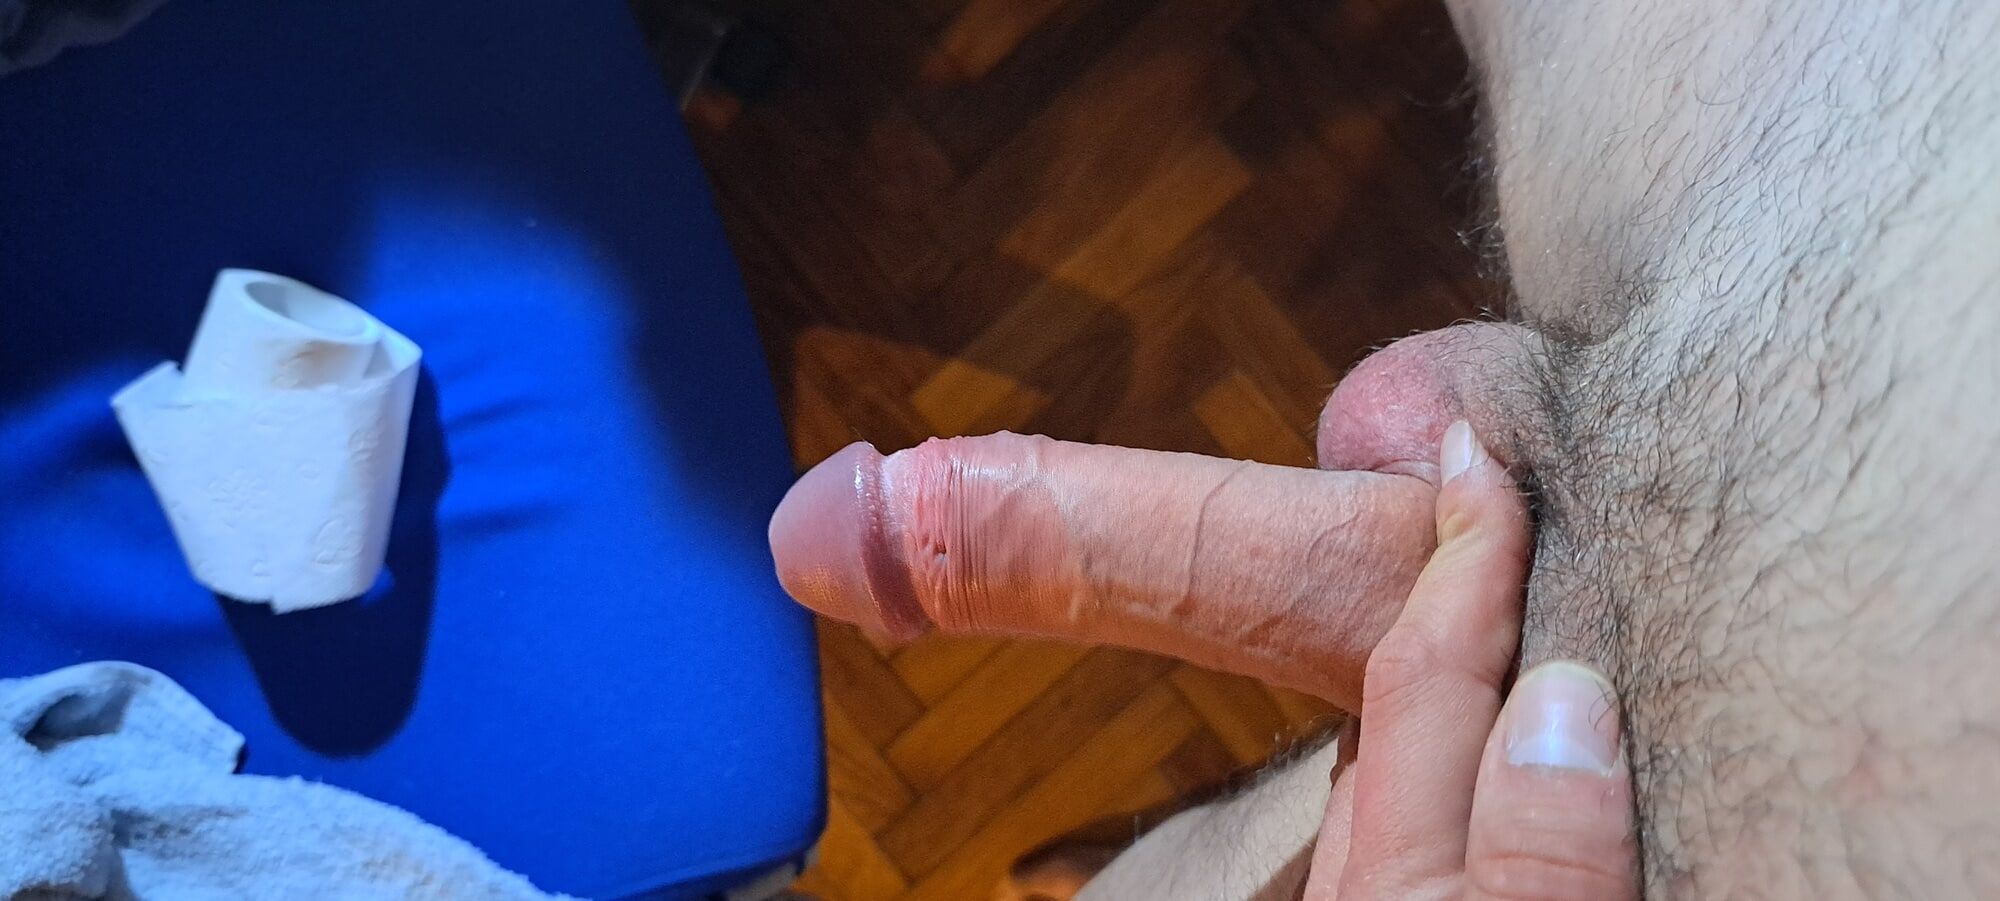 My Cock! #14